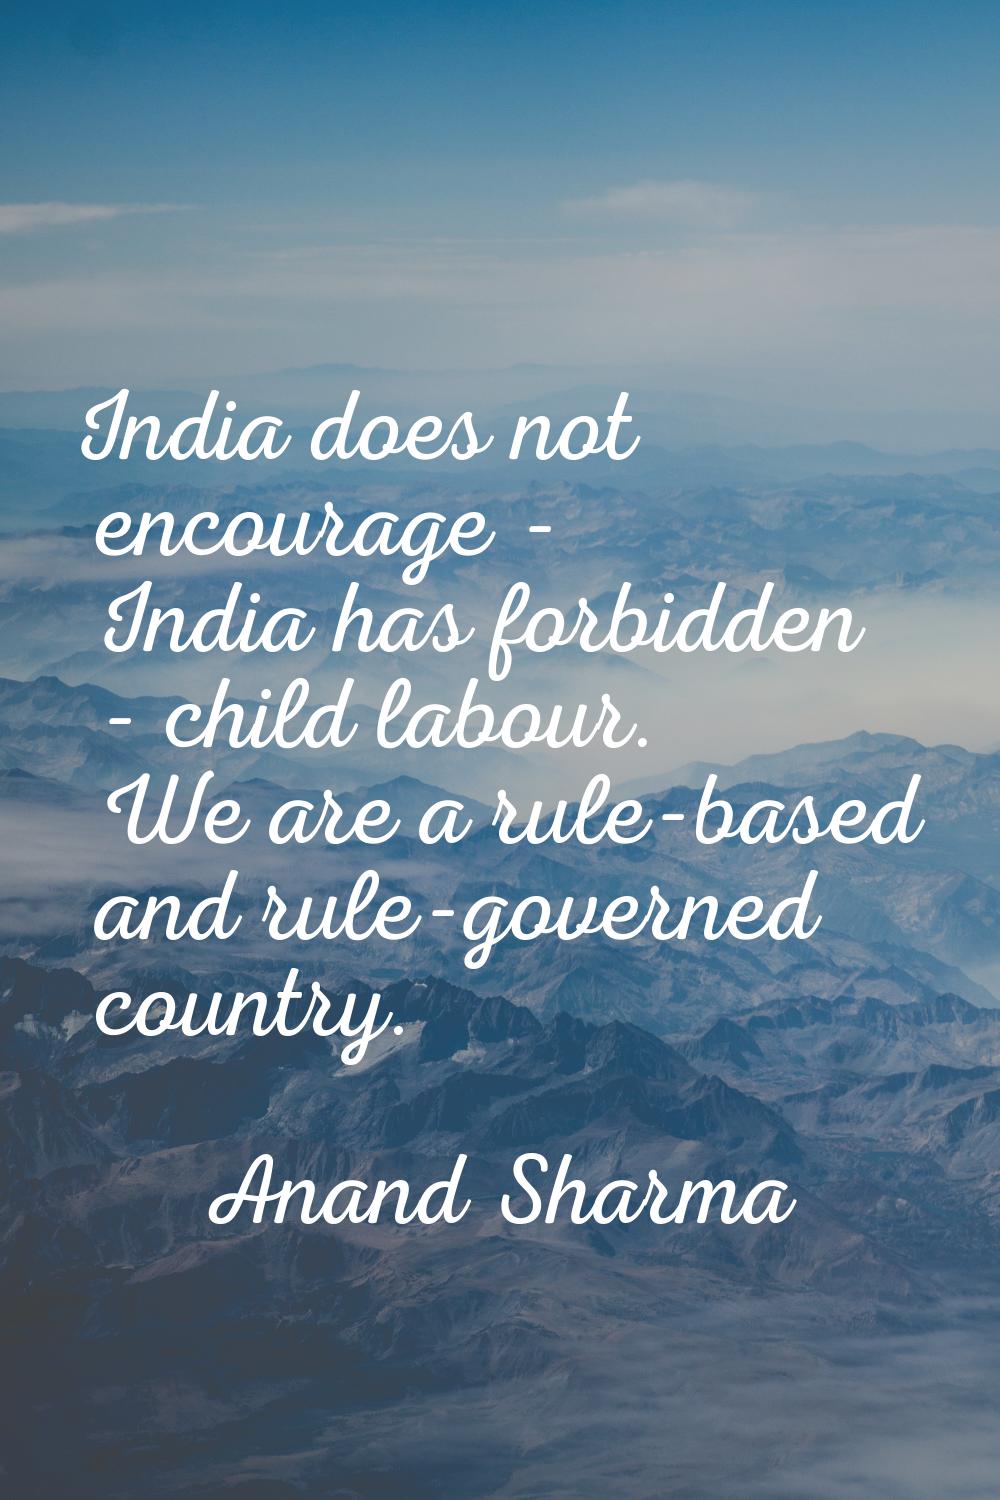 India does not encourage - India has forbidden - child labour. We are a rule-based and rule-governe